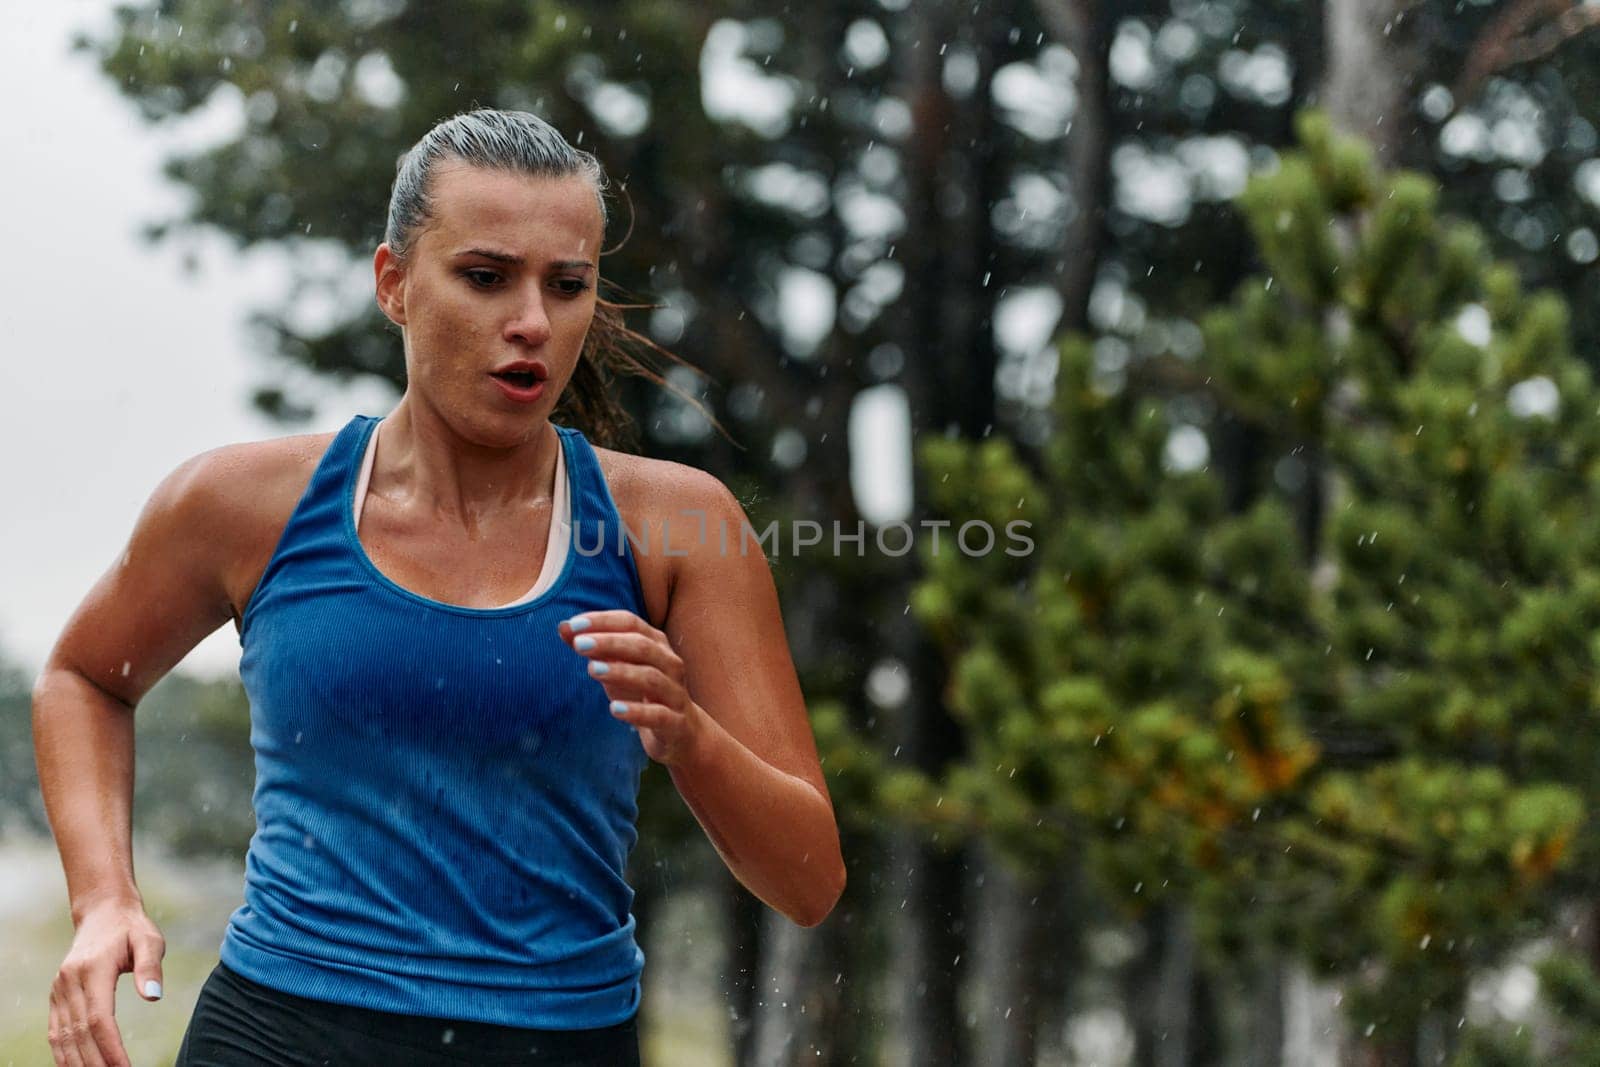 Unstoppable: A Determined Athlete Trains Through the Rain in Pursuit of Marathon Glory by dotshock